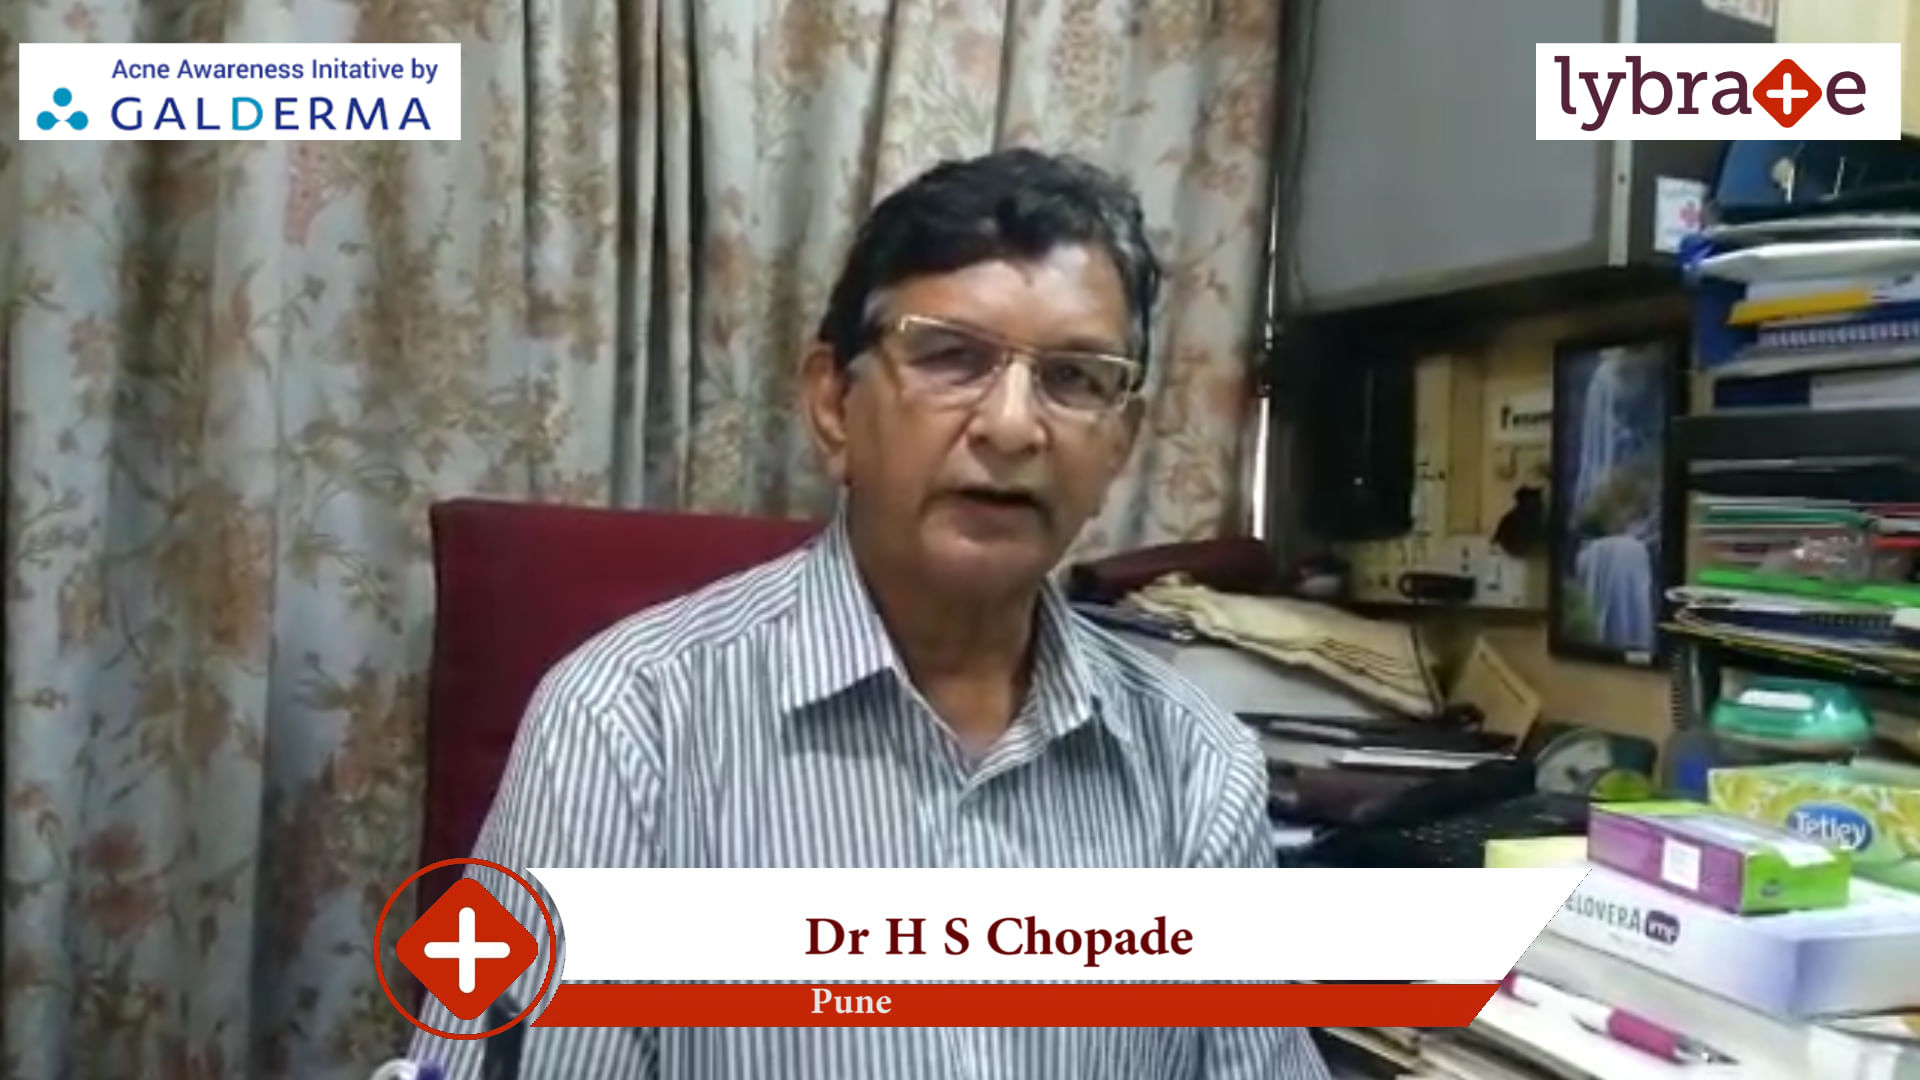 Lybrate | Dr. H S Chopade speaks on IMPORTANCE OF TREATING ACNE EARLY